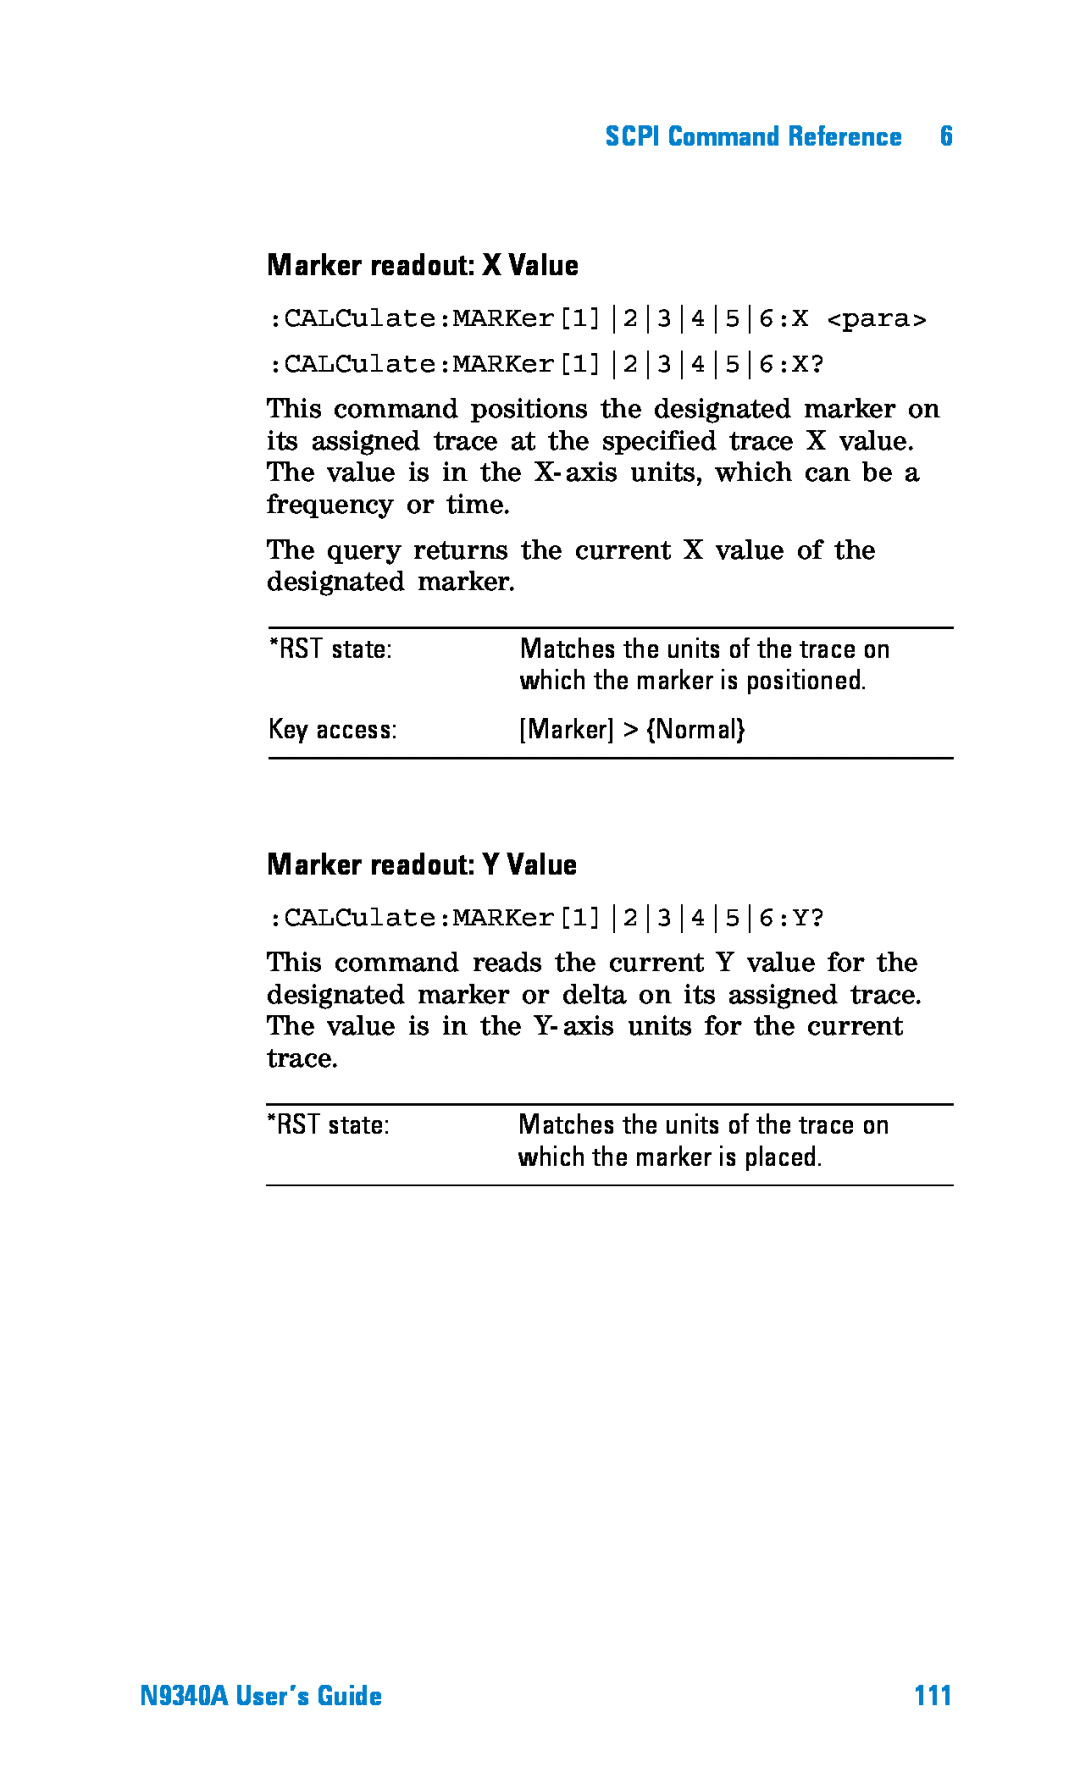 Agilent Technologies manual Marker readout X Value, Marker readout Y Value, SCPI Command Reference, N9340A User’s Guide 